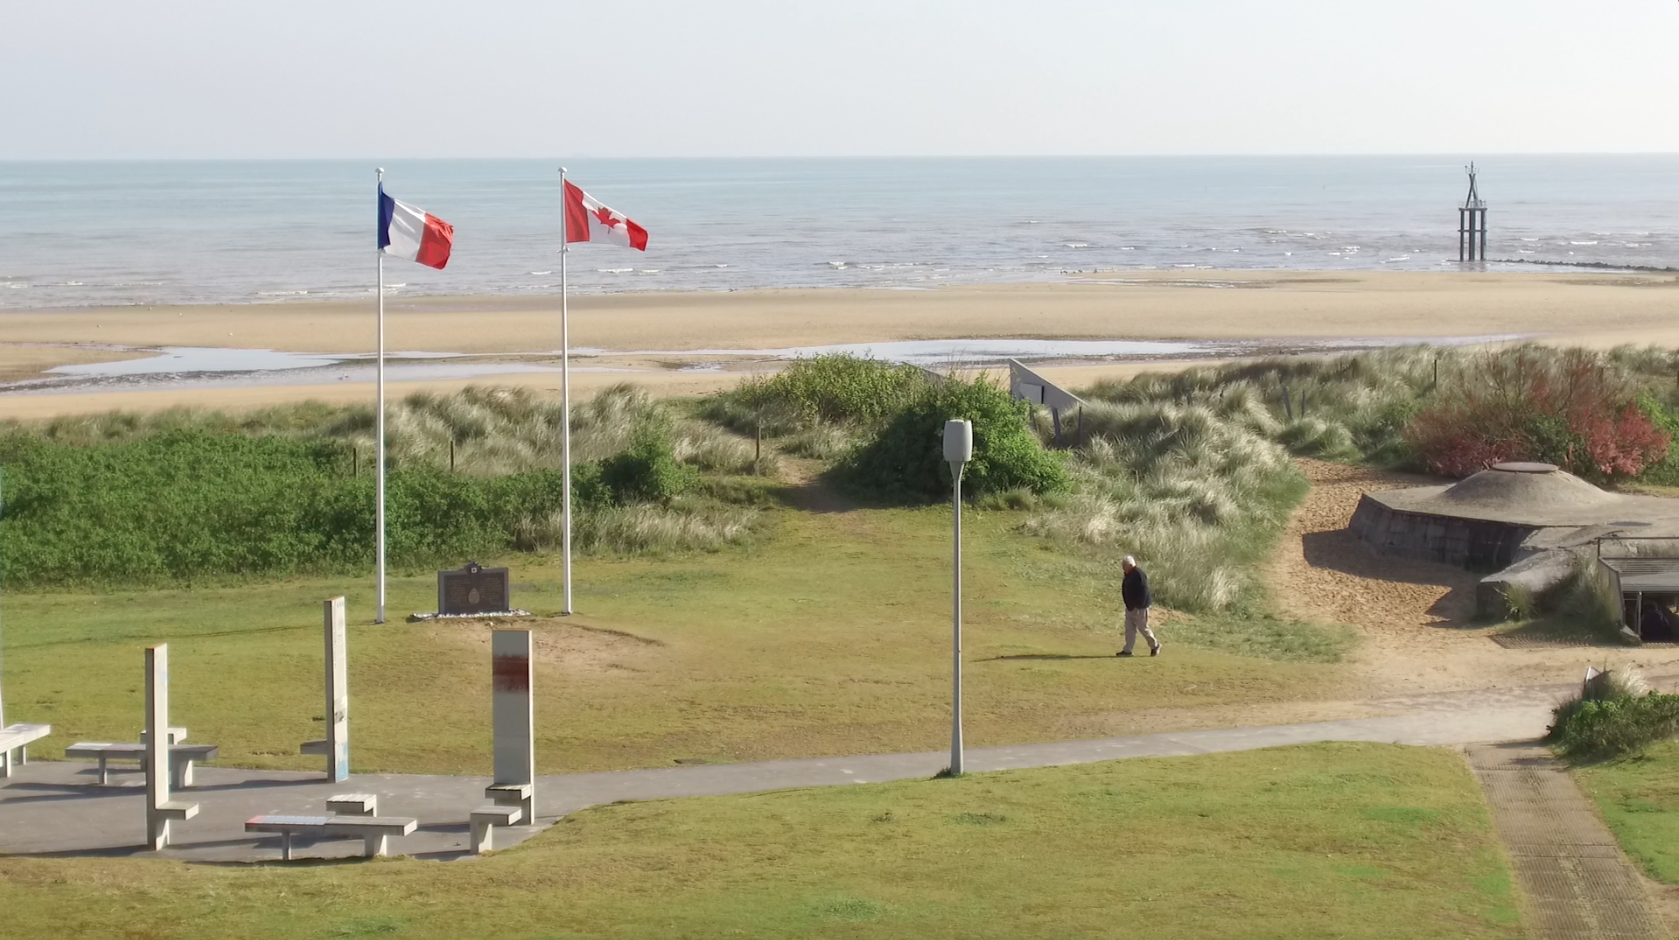 75th Anniversary of D-Day Highlights Opportunity for Travel Advisors